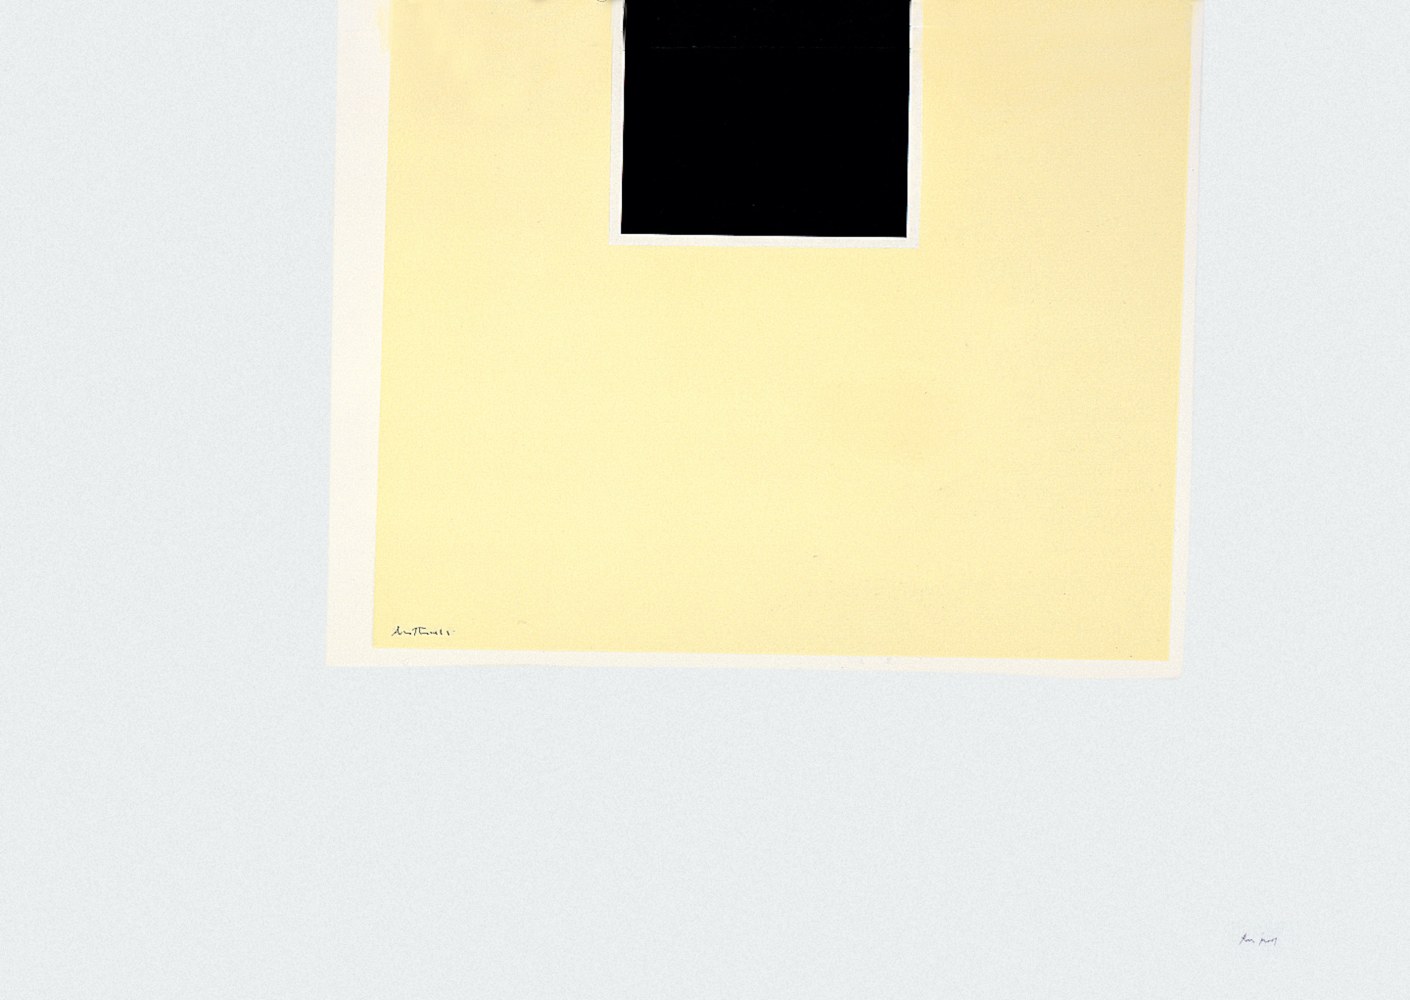 London Series II: Untitled (Yellow/Black), 1971

screenprint on white J.B. Green mould-made Double Elephant paper, edition of 150

28 1/2 x 41 in. / 71.8 x 104.1 cm